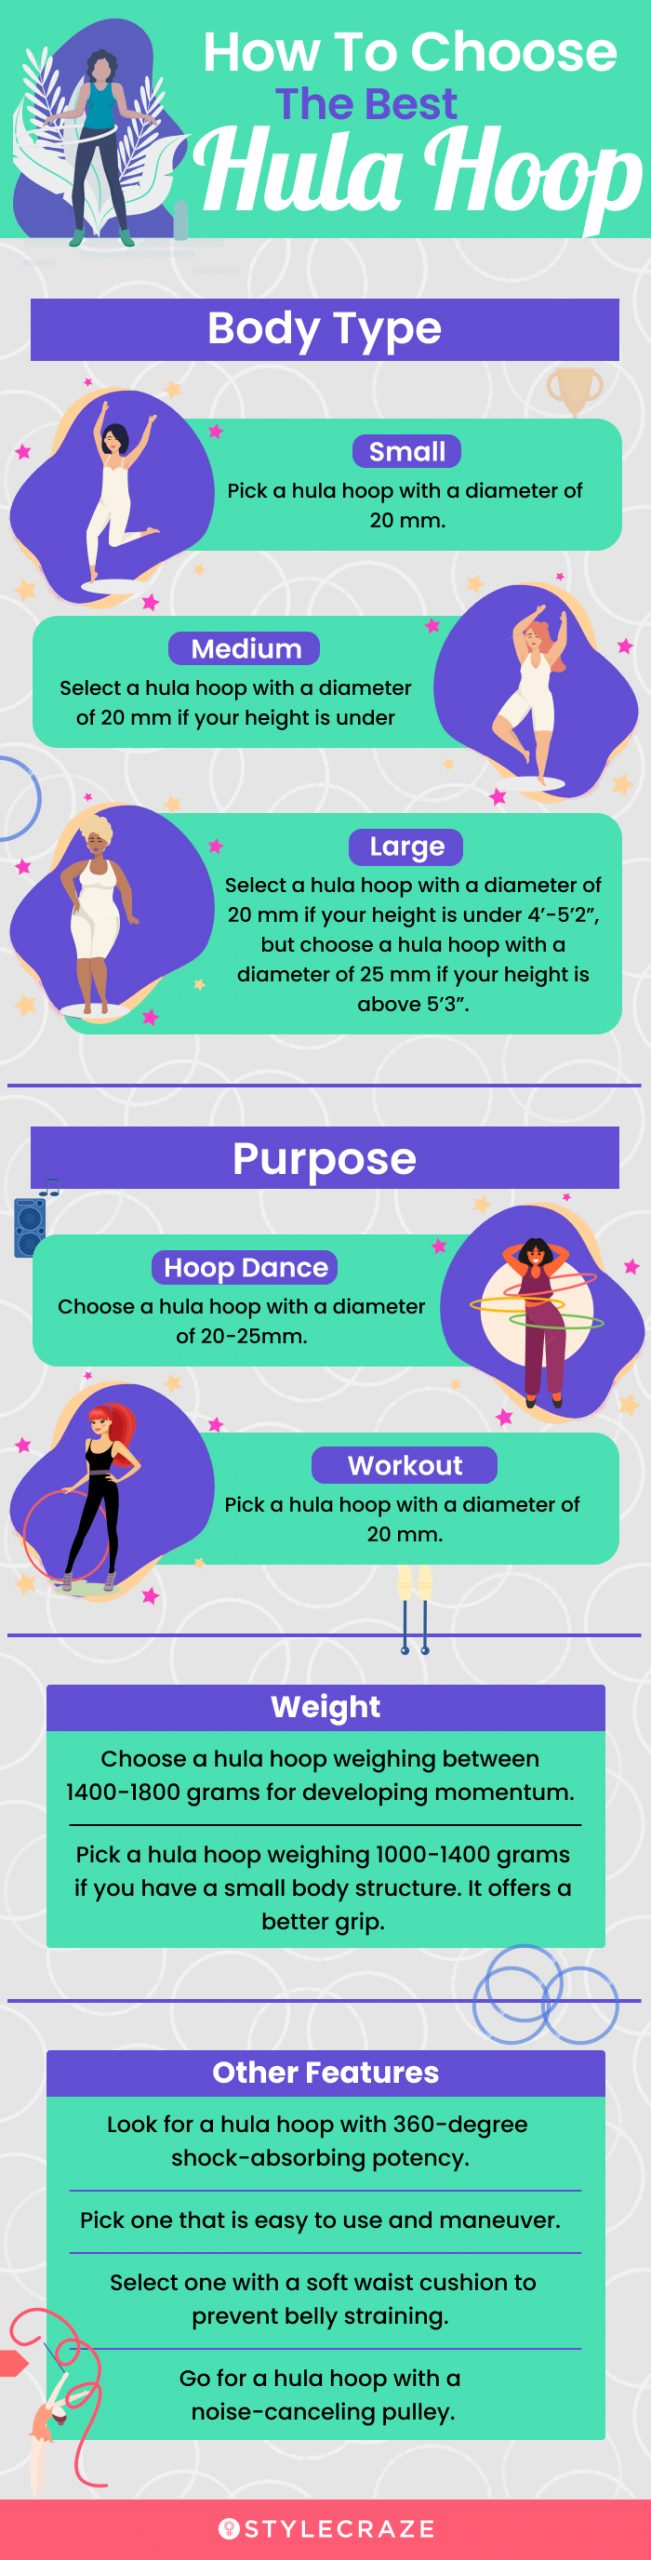 How To Choose The Best Hula Hoop (infographic)